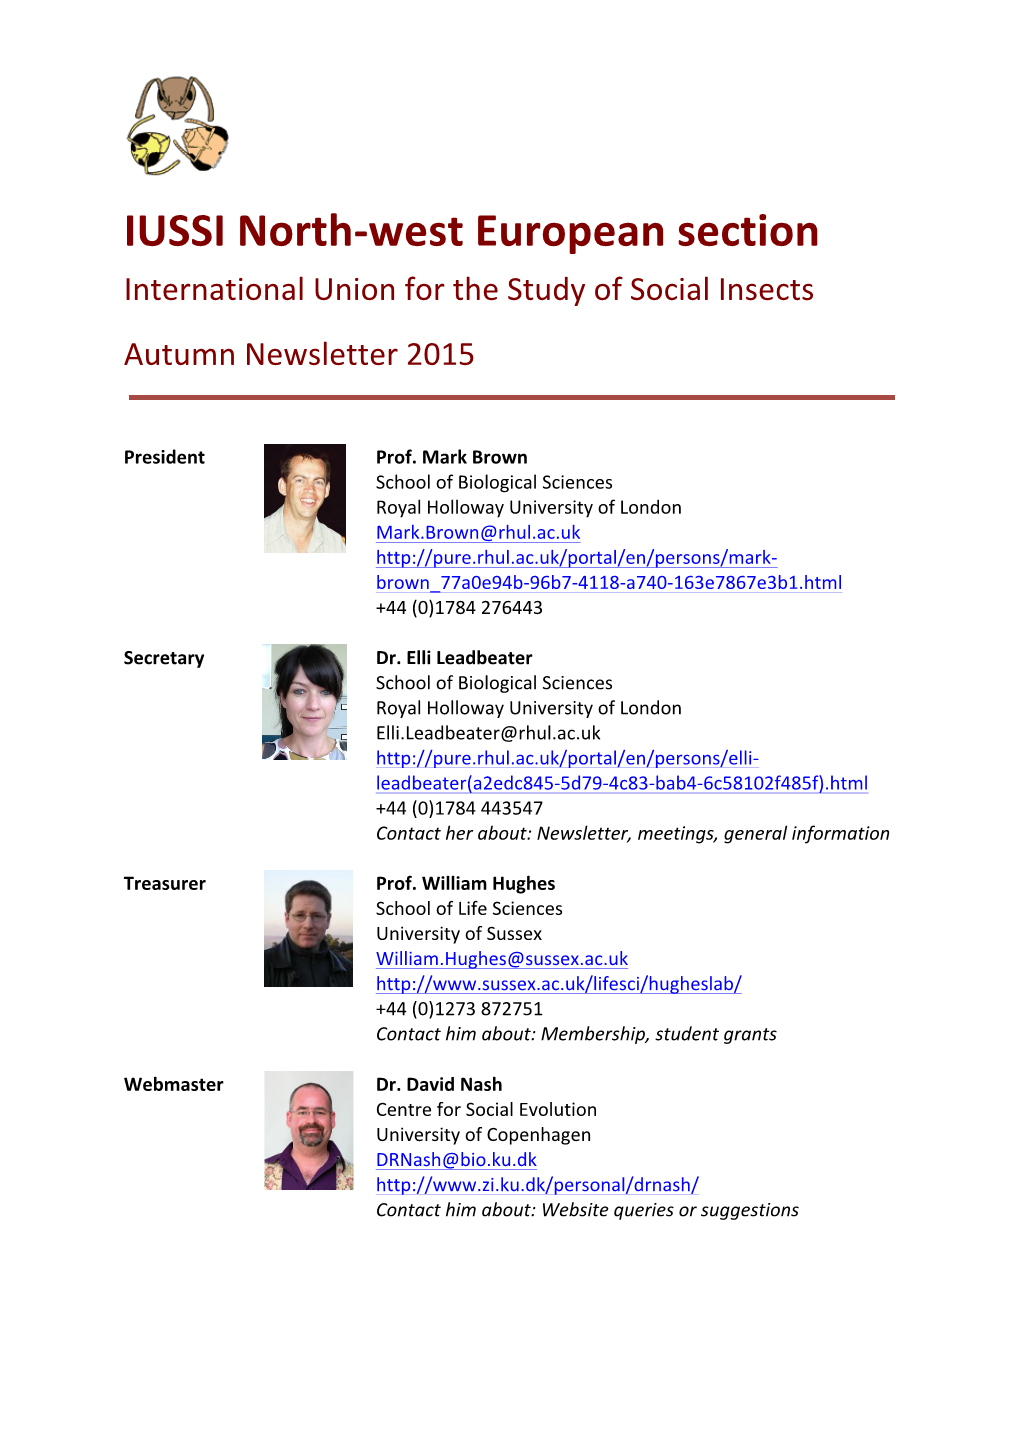 IUSSI North-‐West European Section